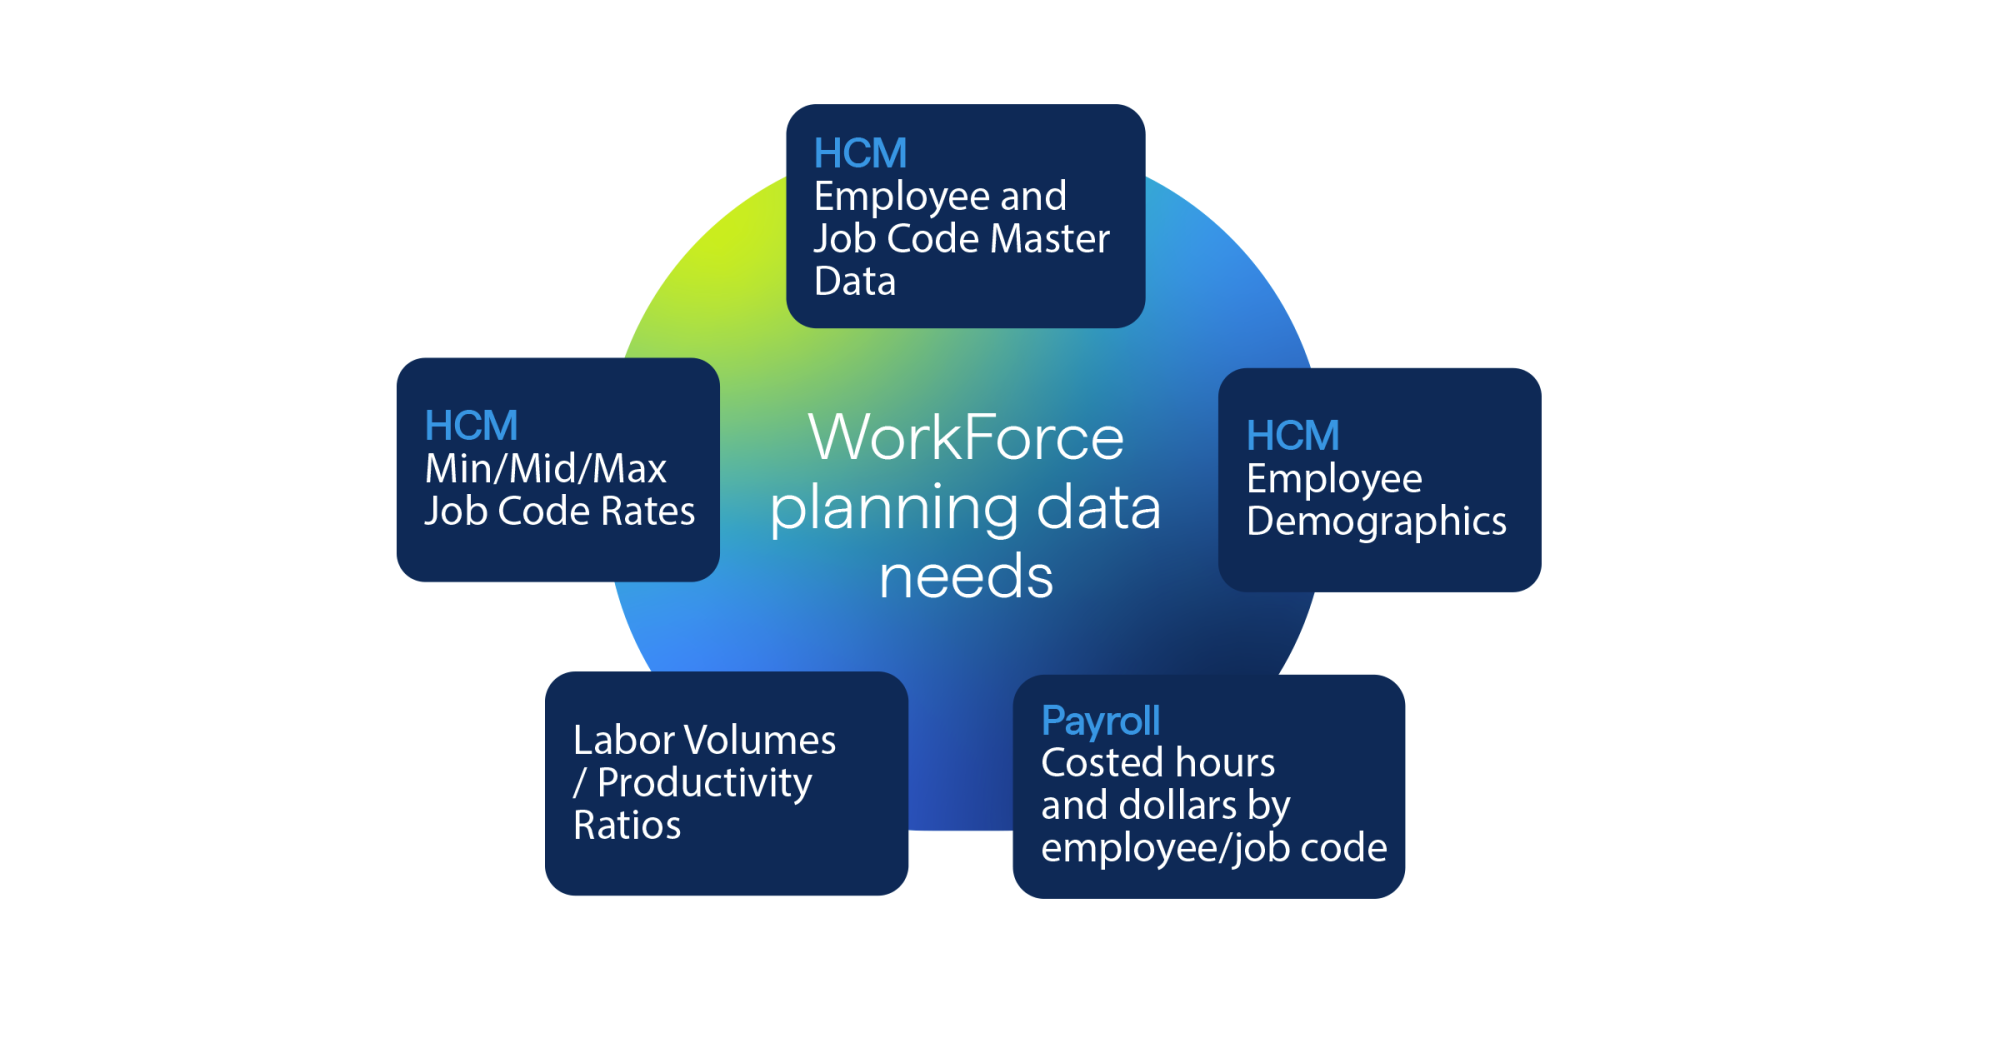 Workforce planning data needs from HCM and payroll systems